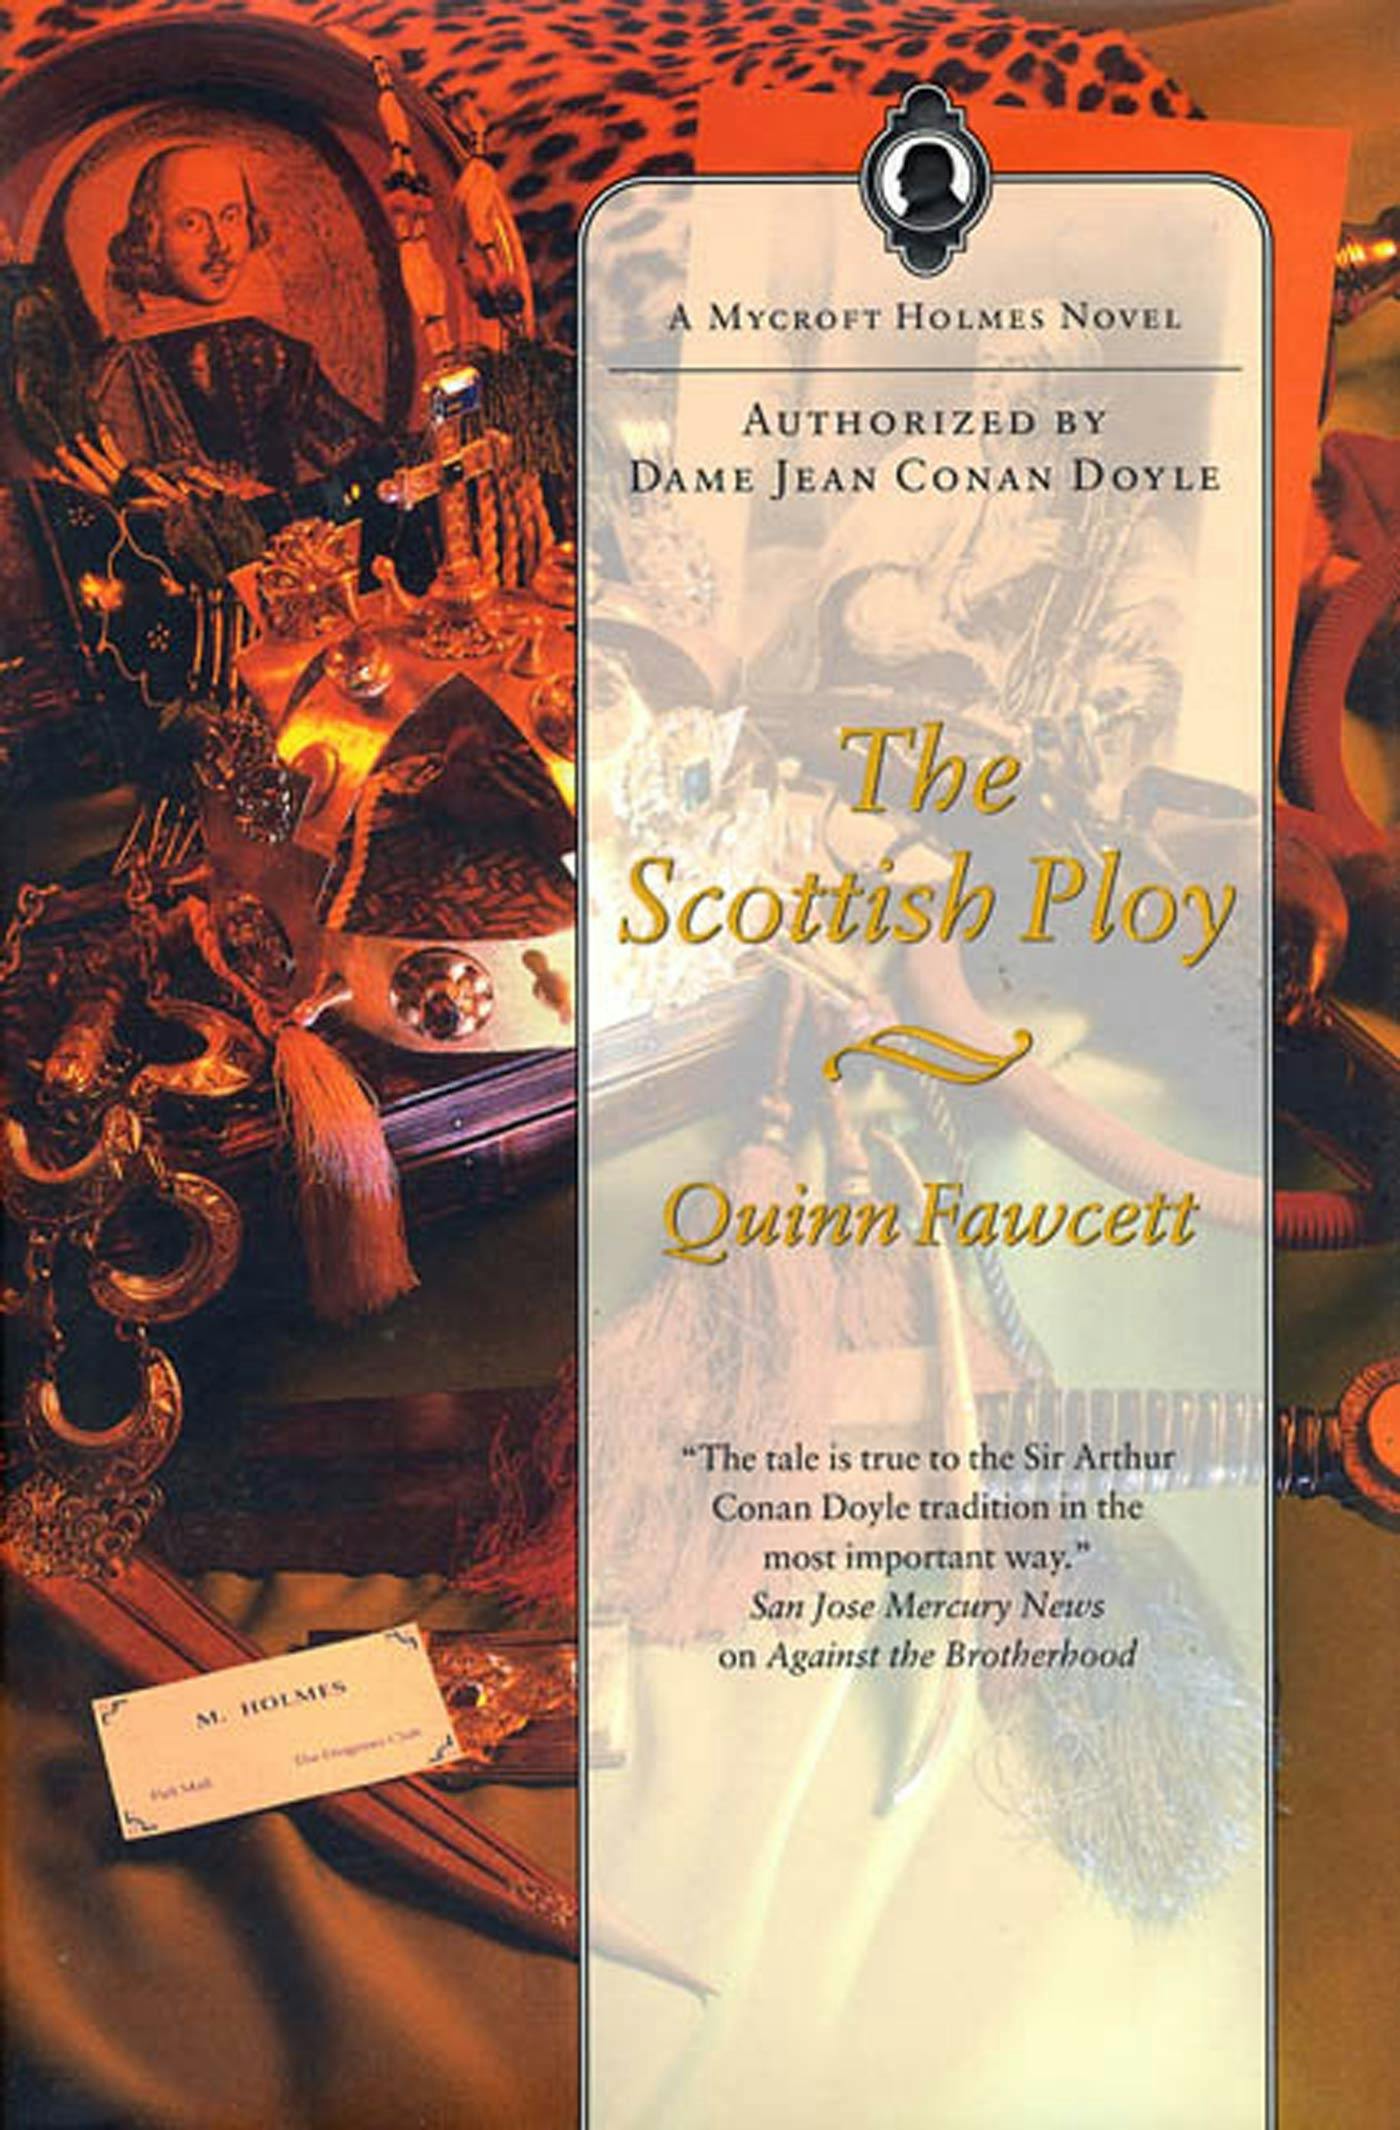 Cover for the book titled as: The Scottish Ploy